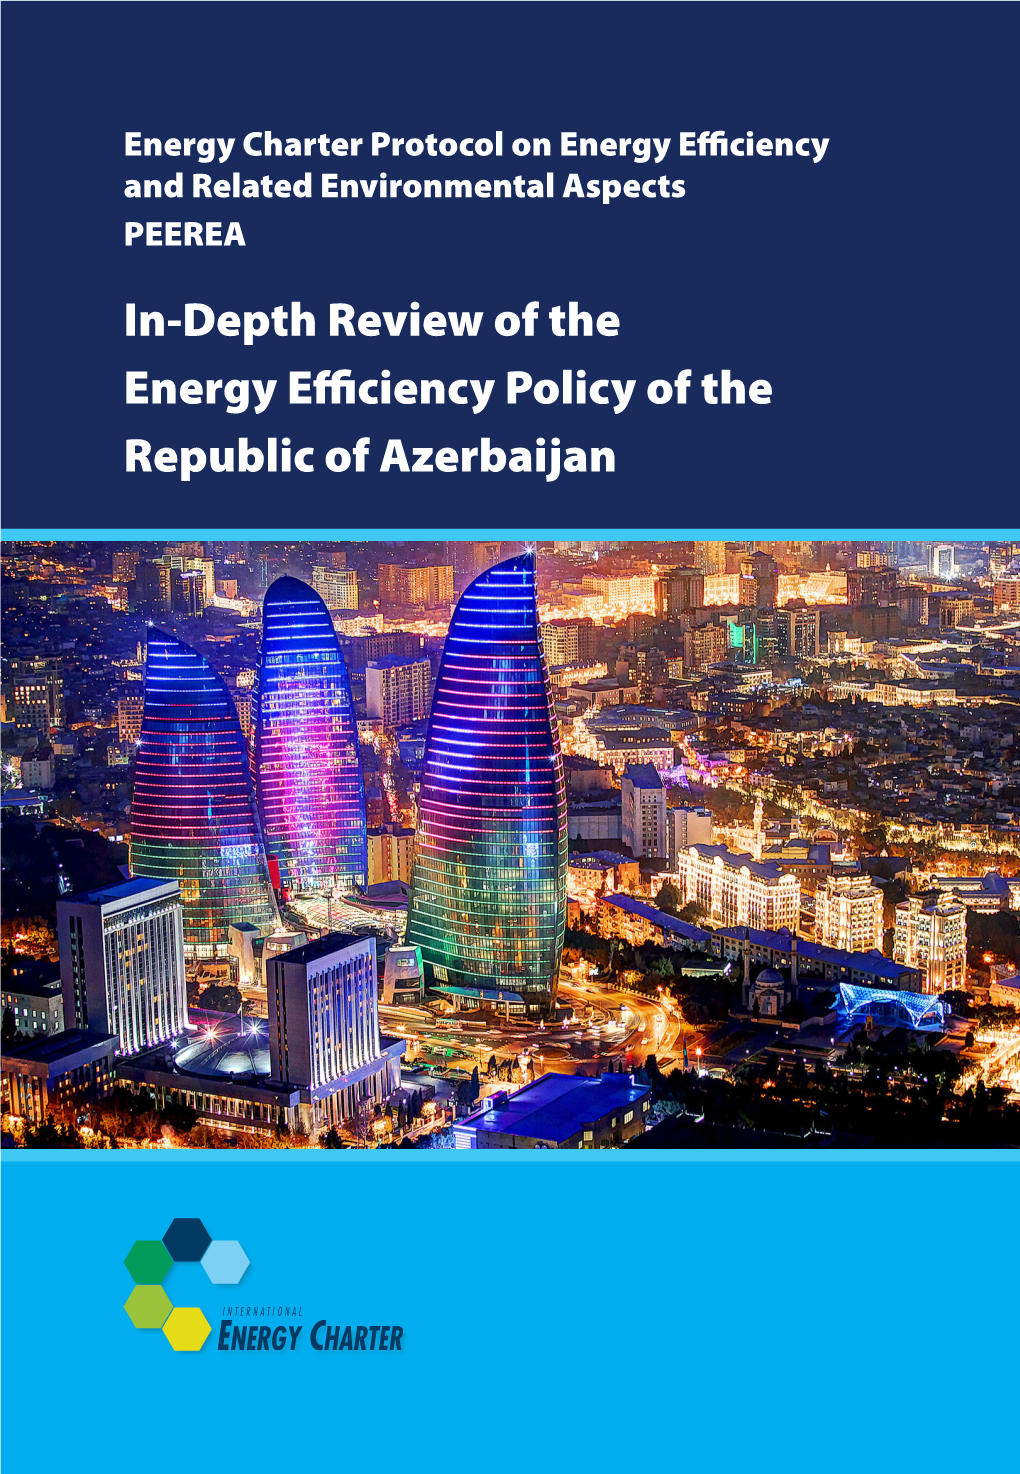 In-Depth Review of the Energy Efficiency Policy of the Republic of Azerbaijan Energy Charter Protocol on Energy Efficiency and Related Environmental Aspects PEEREA